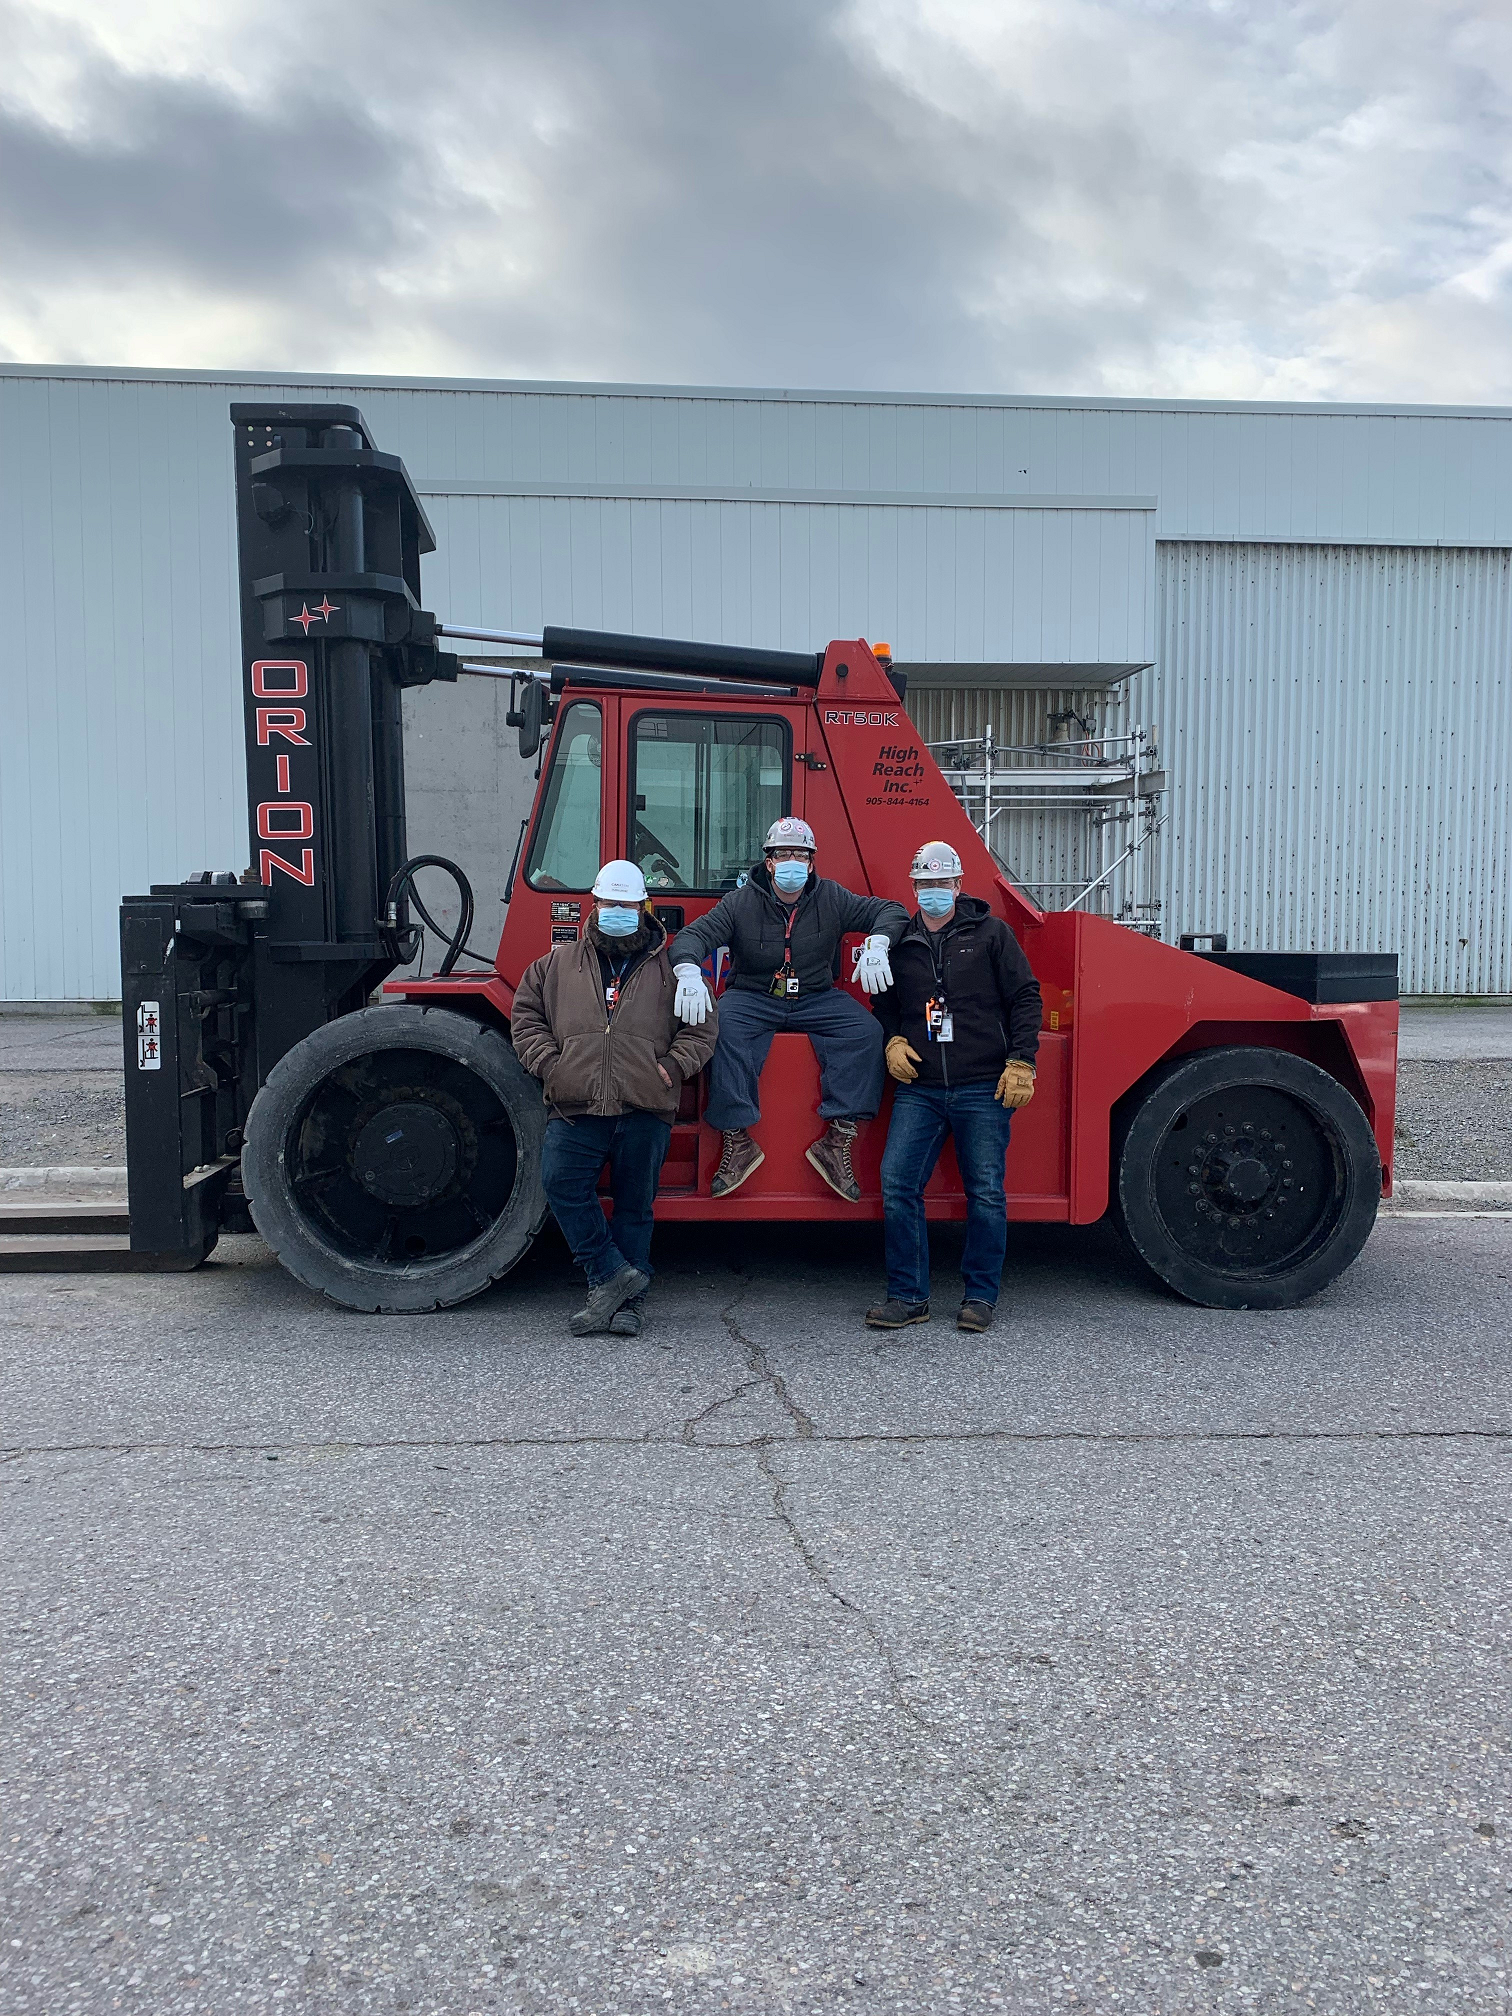 homas Lintner, Christopher Calcafuoco and Brad Martin posing on an Orion RT50K forklift.